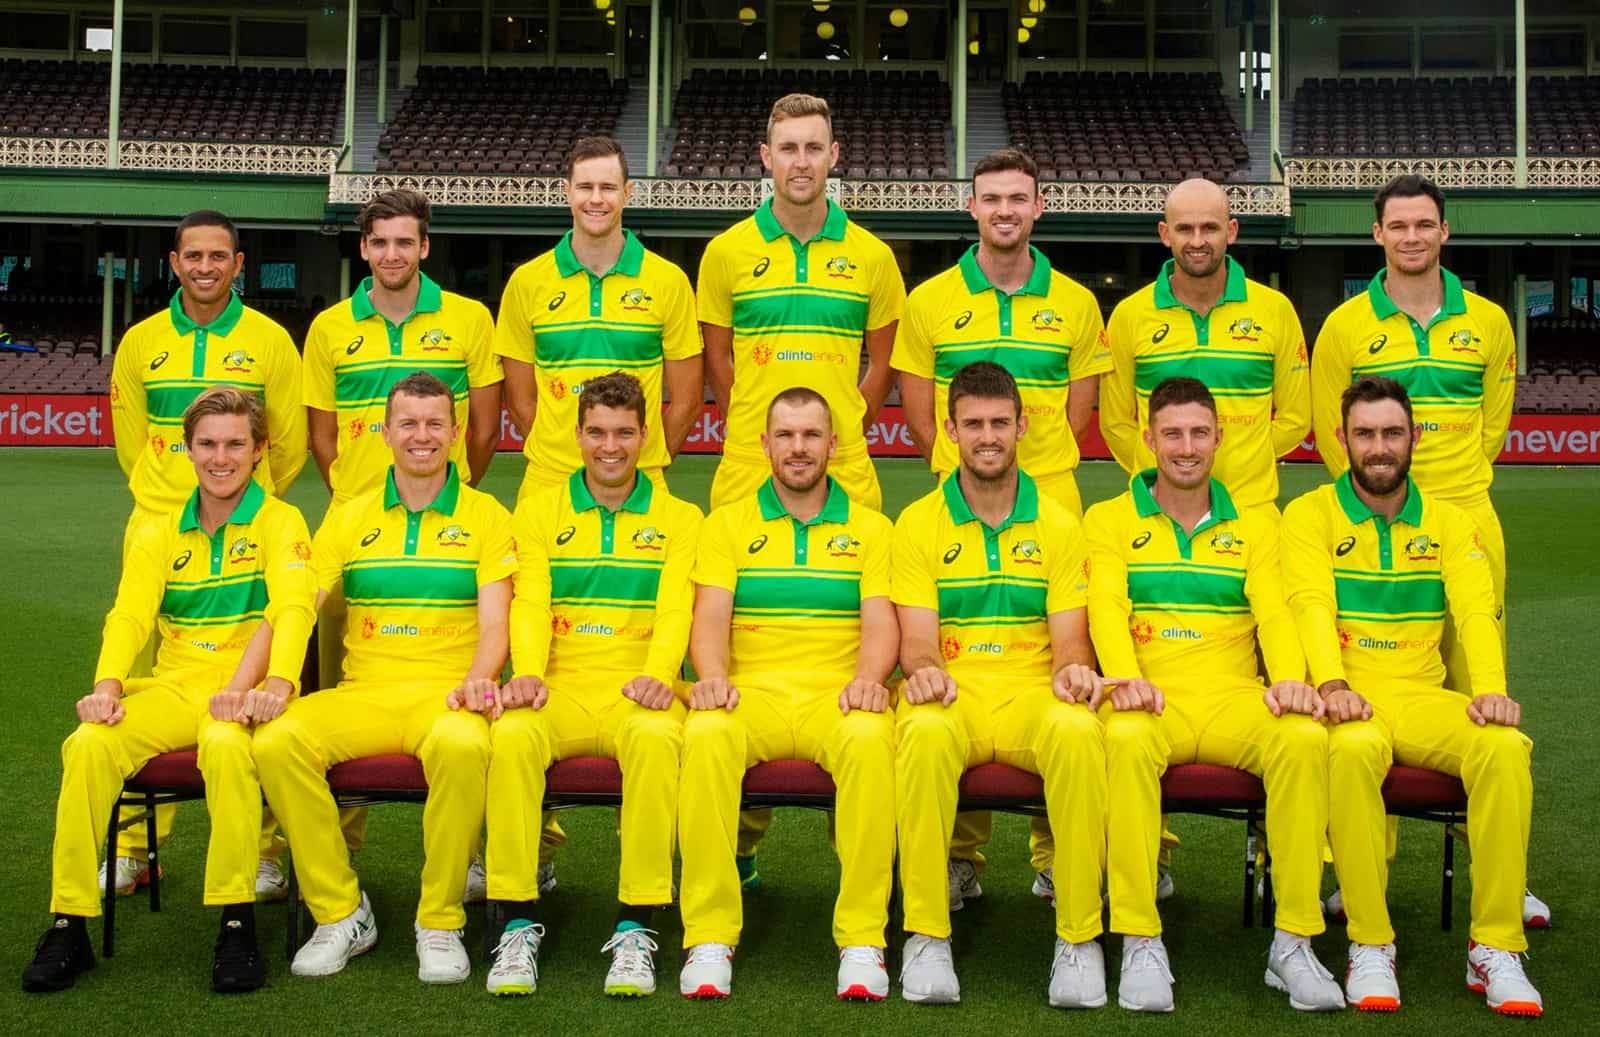 Is the Australian Cricket fully ready for the World Cup? Can it dominate?